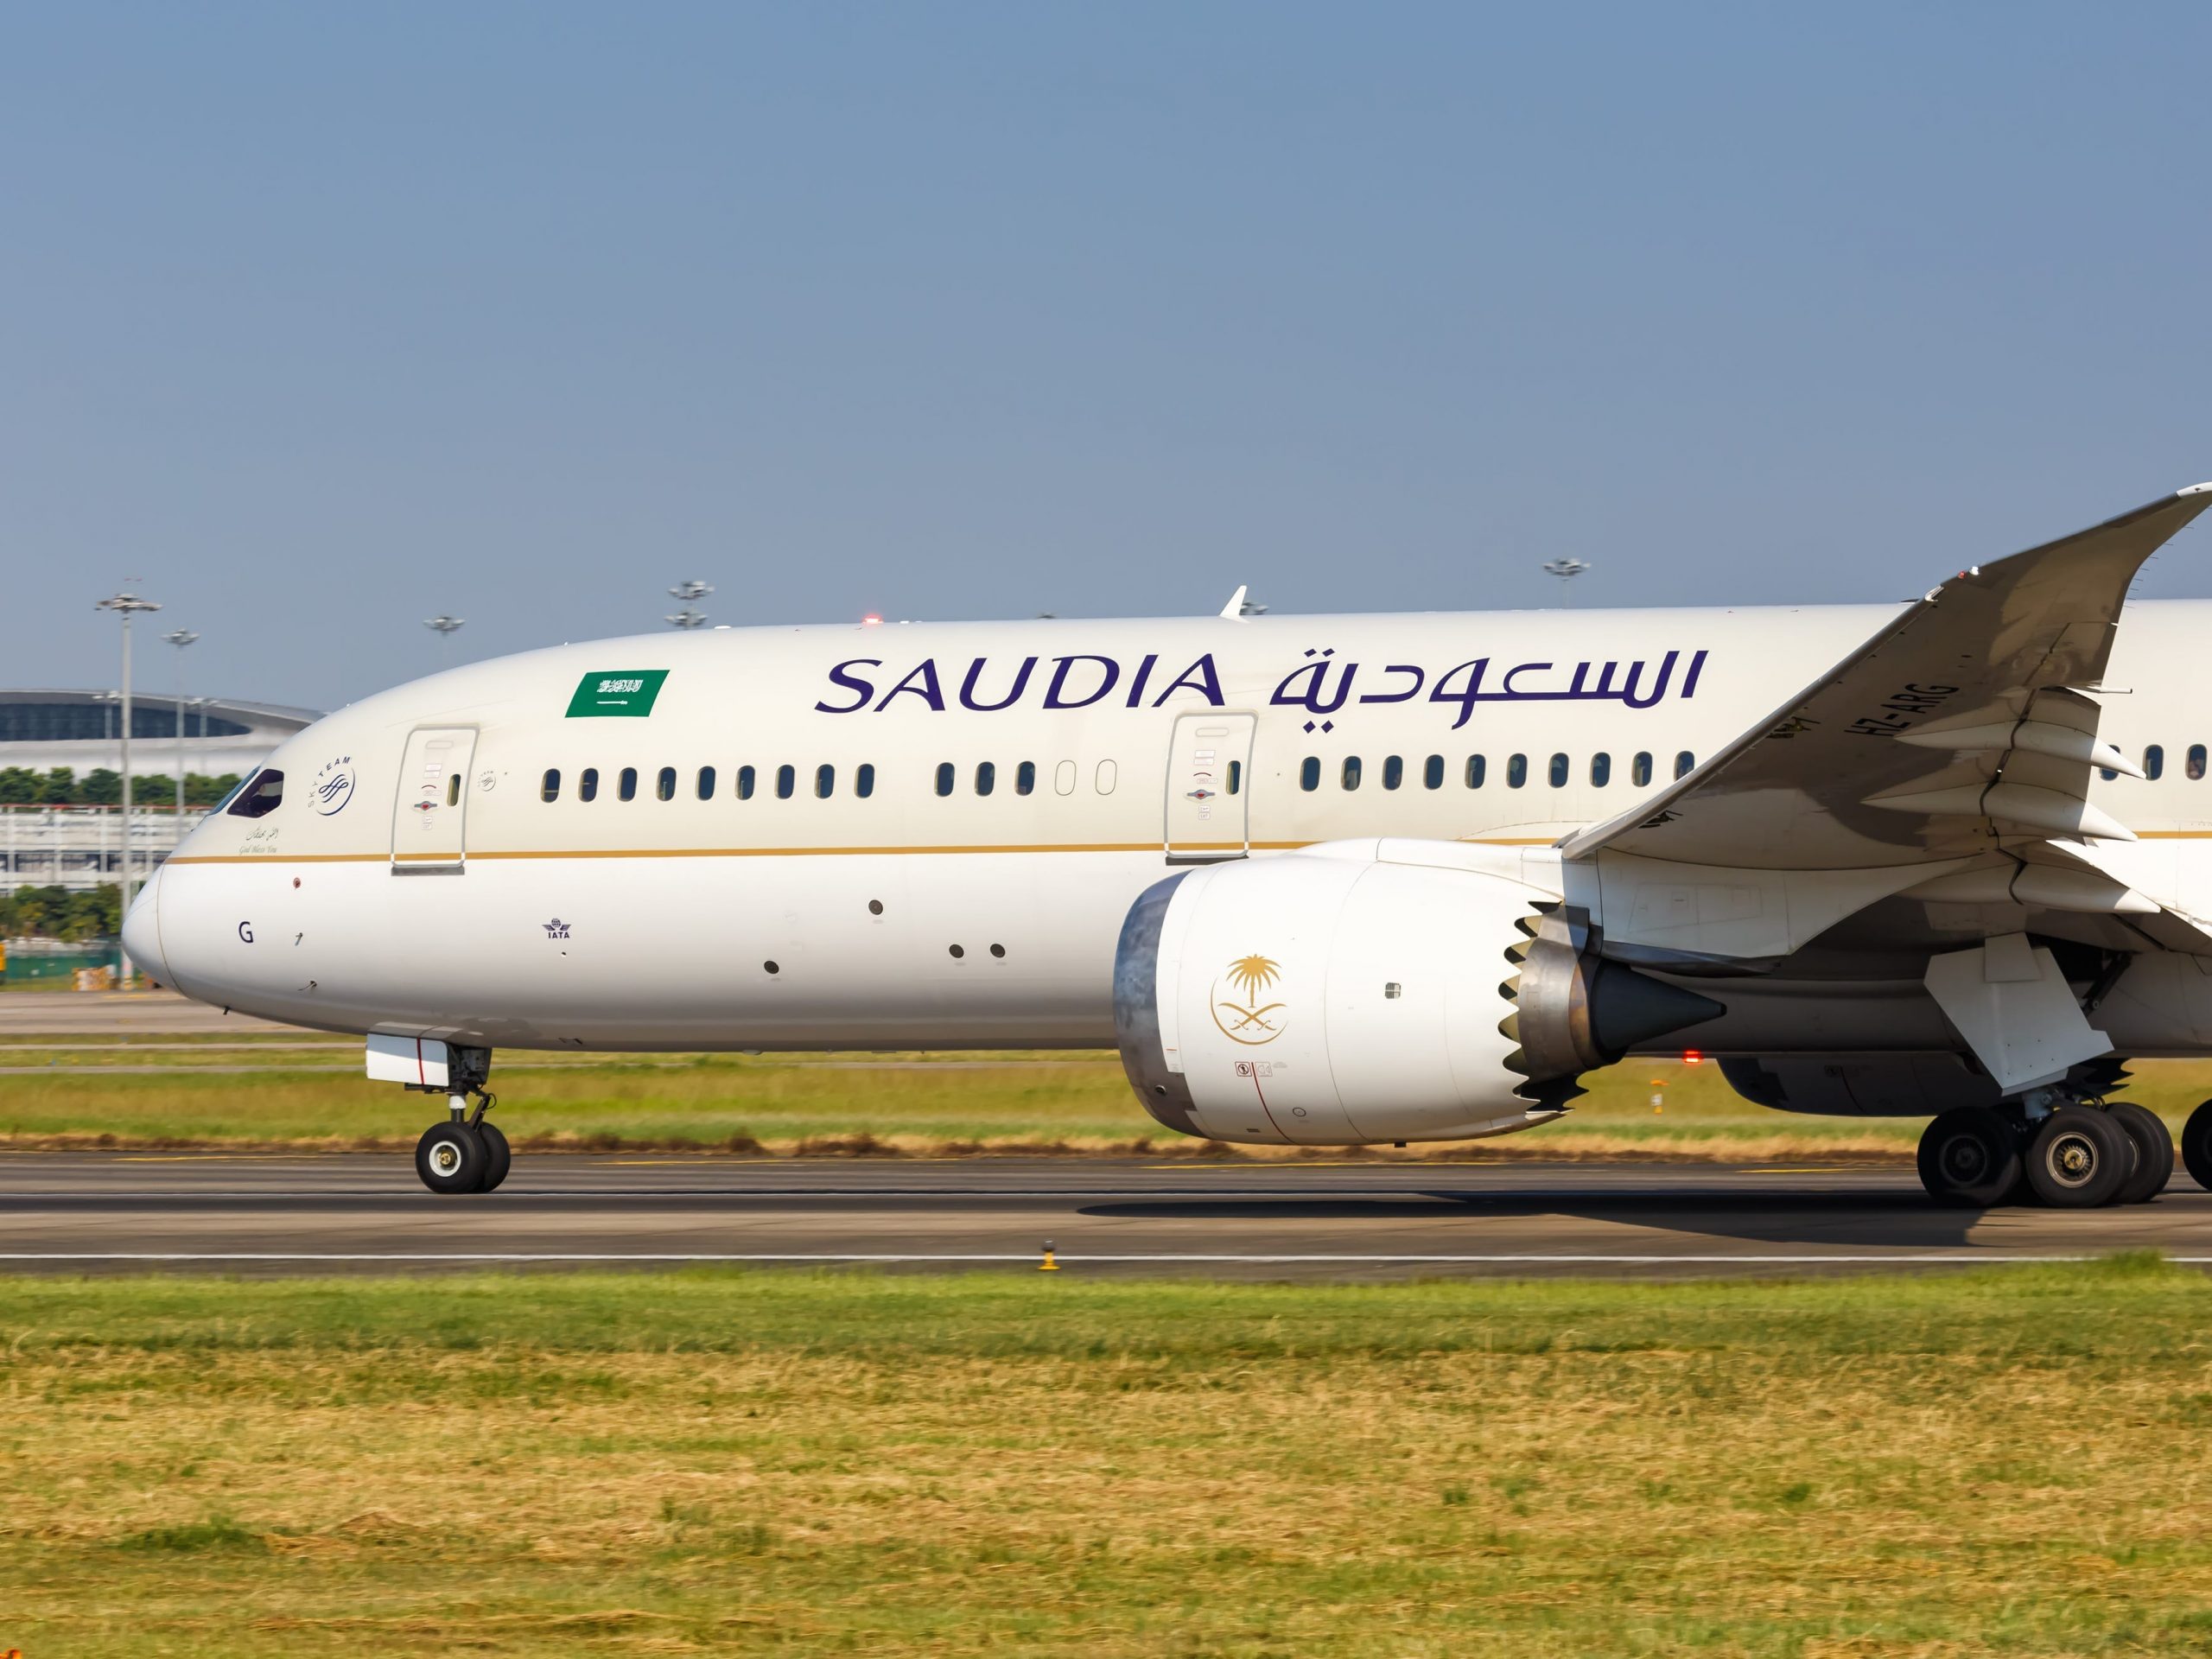 Saudia Boeing 787-9 Dreamliner at Guangzhou airport (CAN) in China